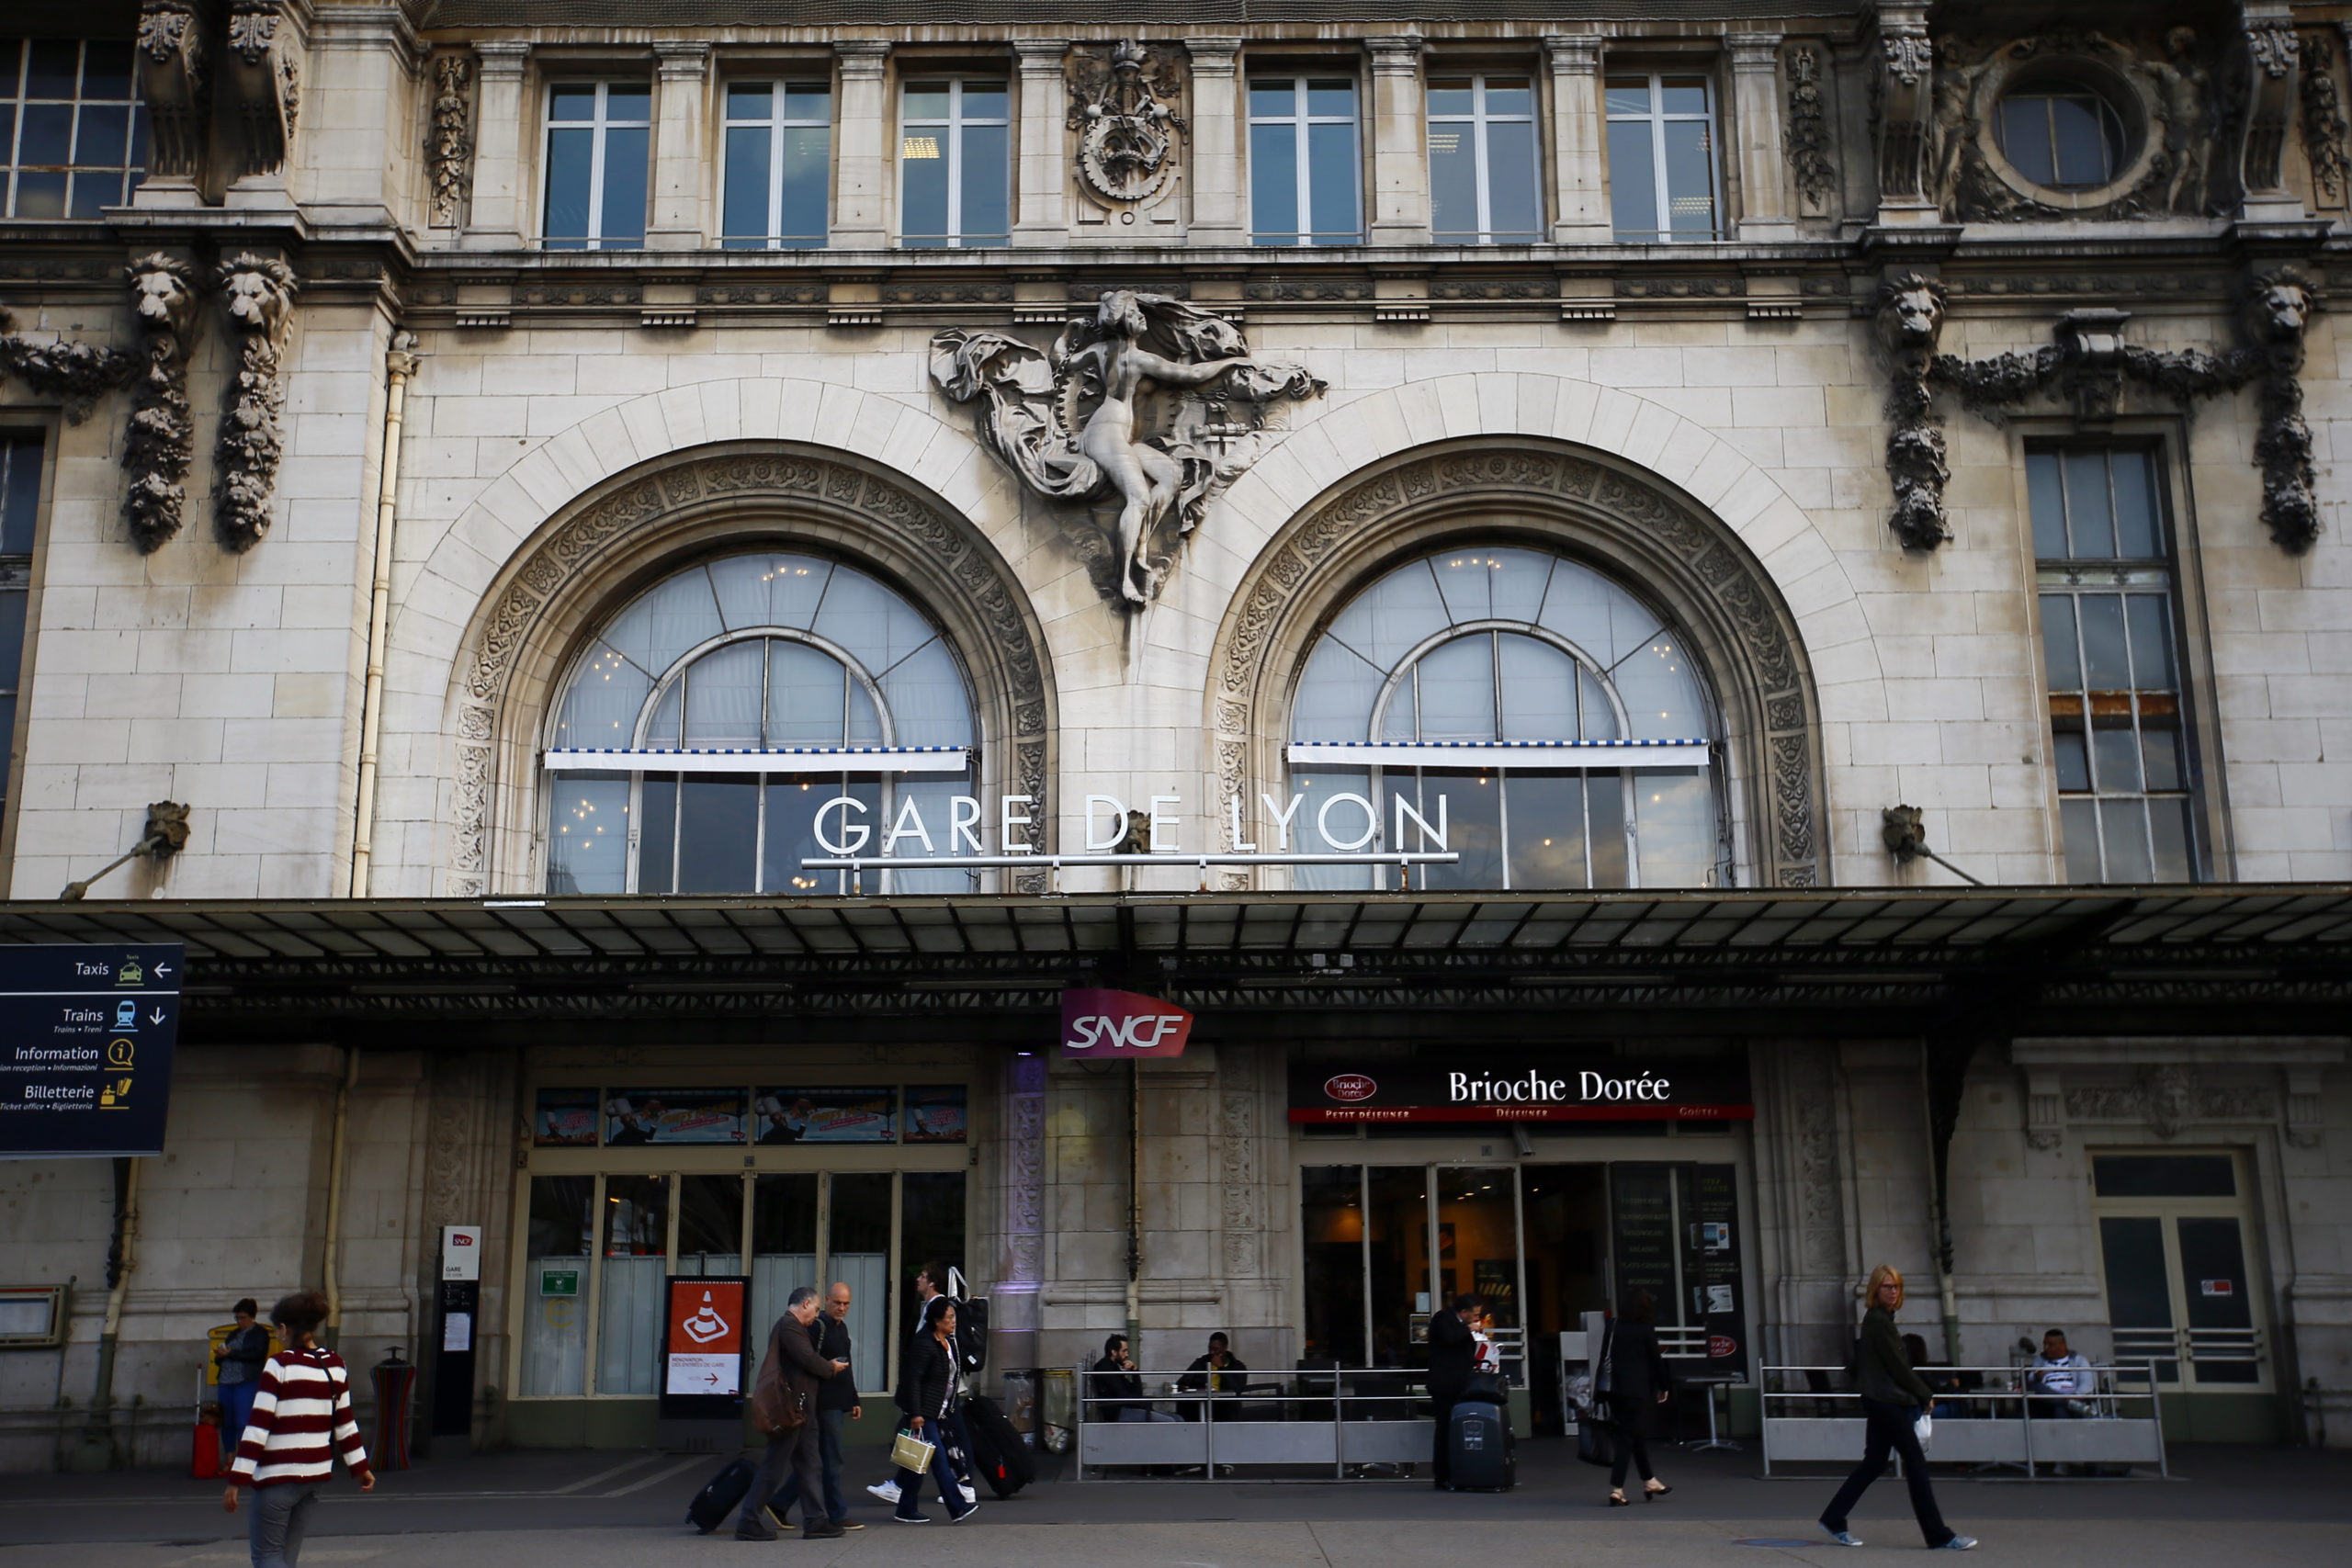 An assailant injured three people in a stabbing attack at the Gare de Lyon train station in Paris, Saturday.